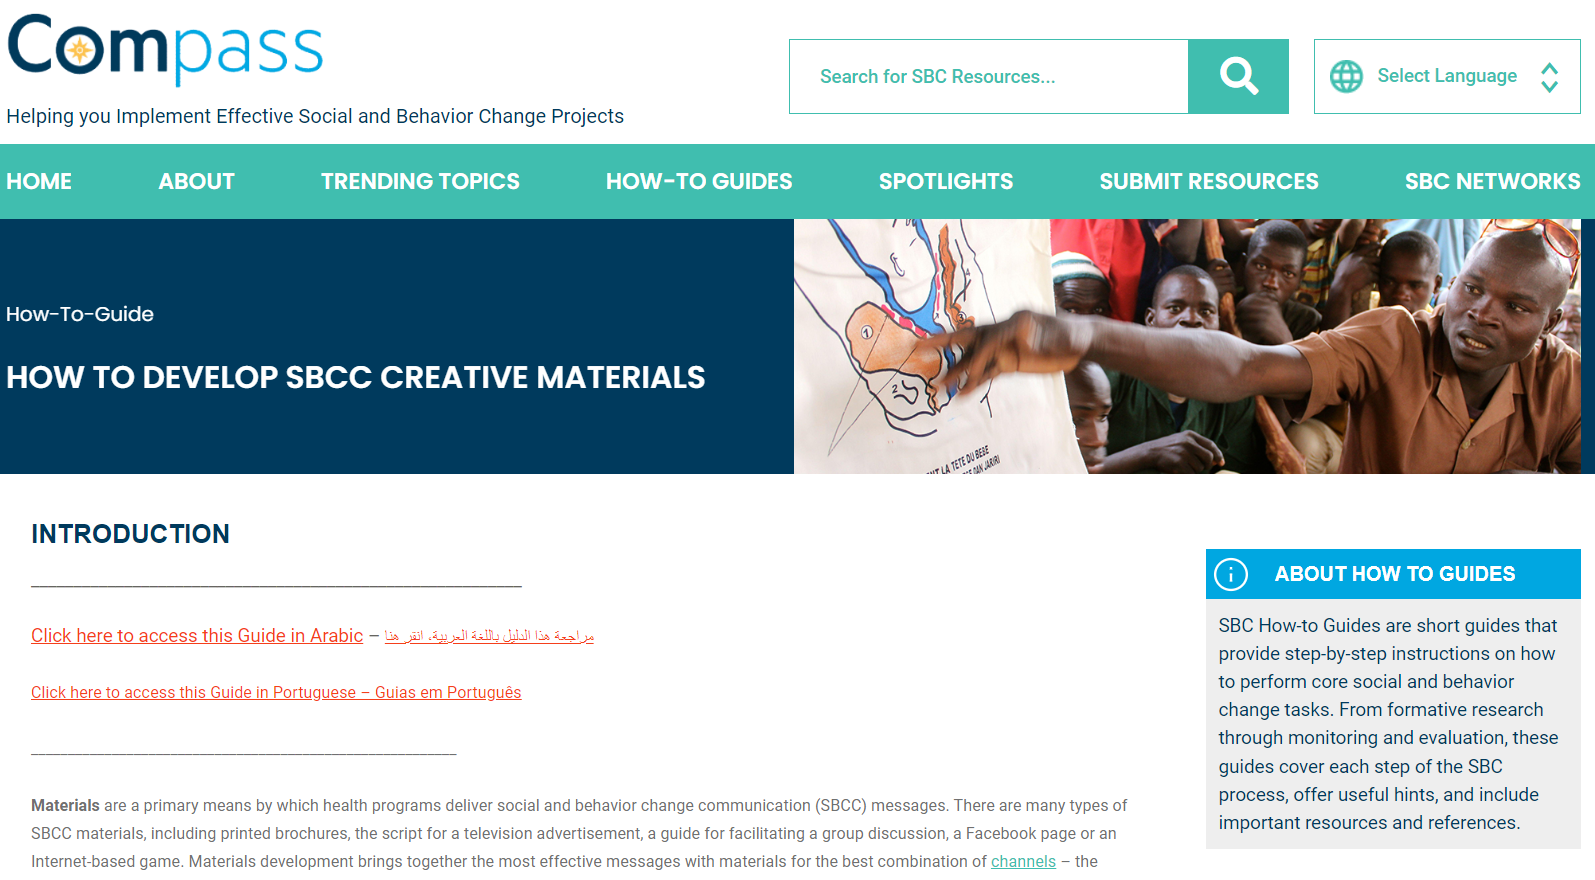 Screenshot of the How to Develop SBCC Creative Materials webpage